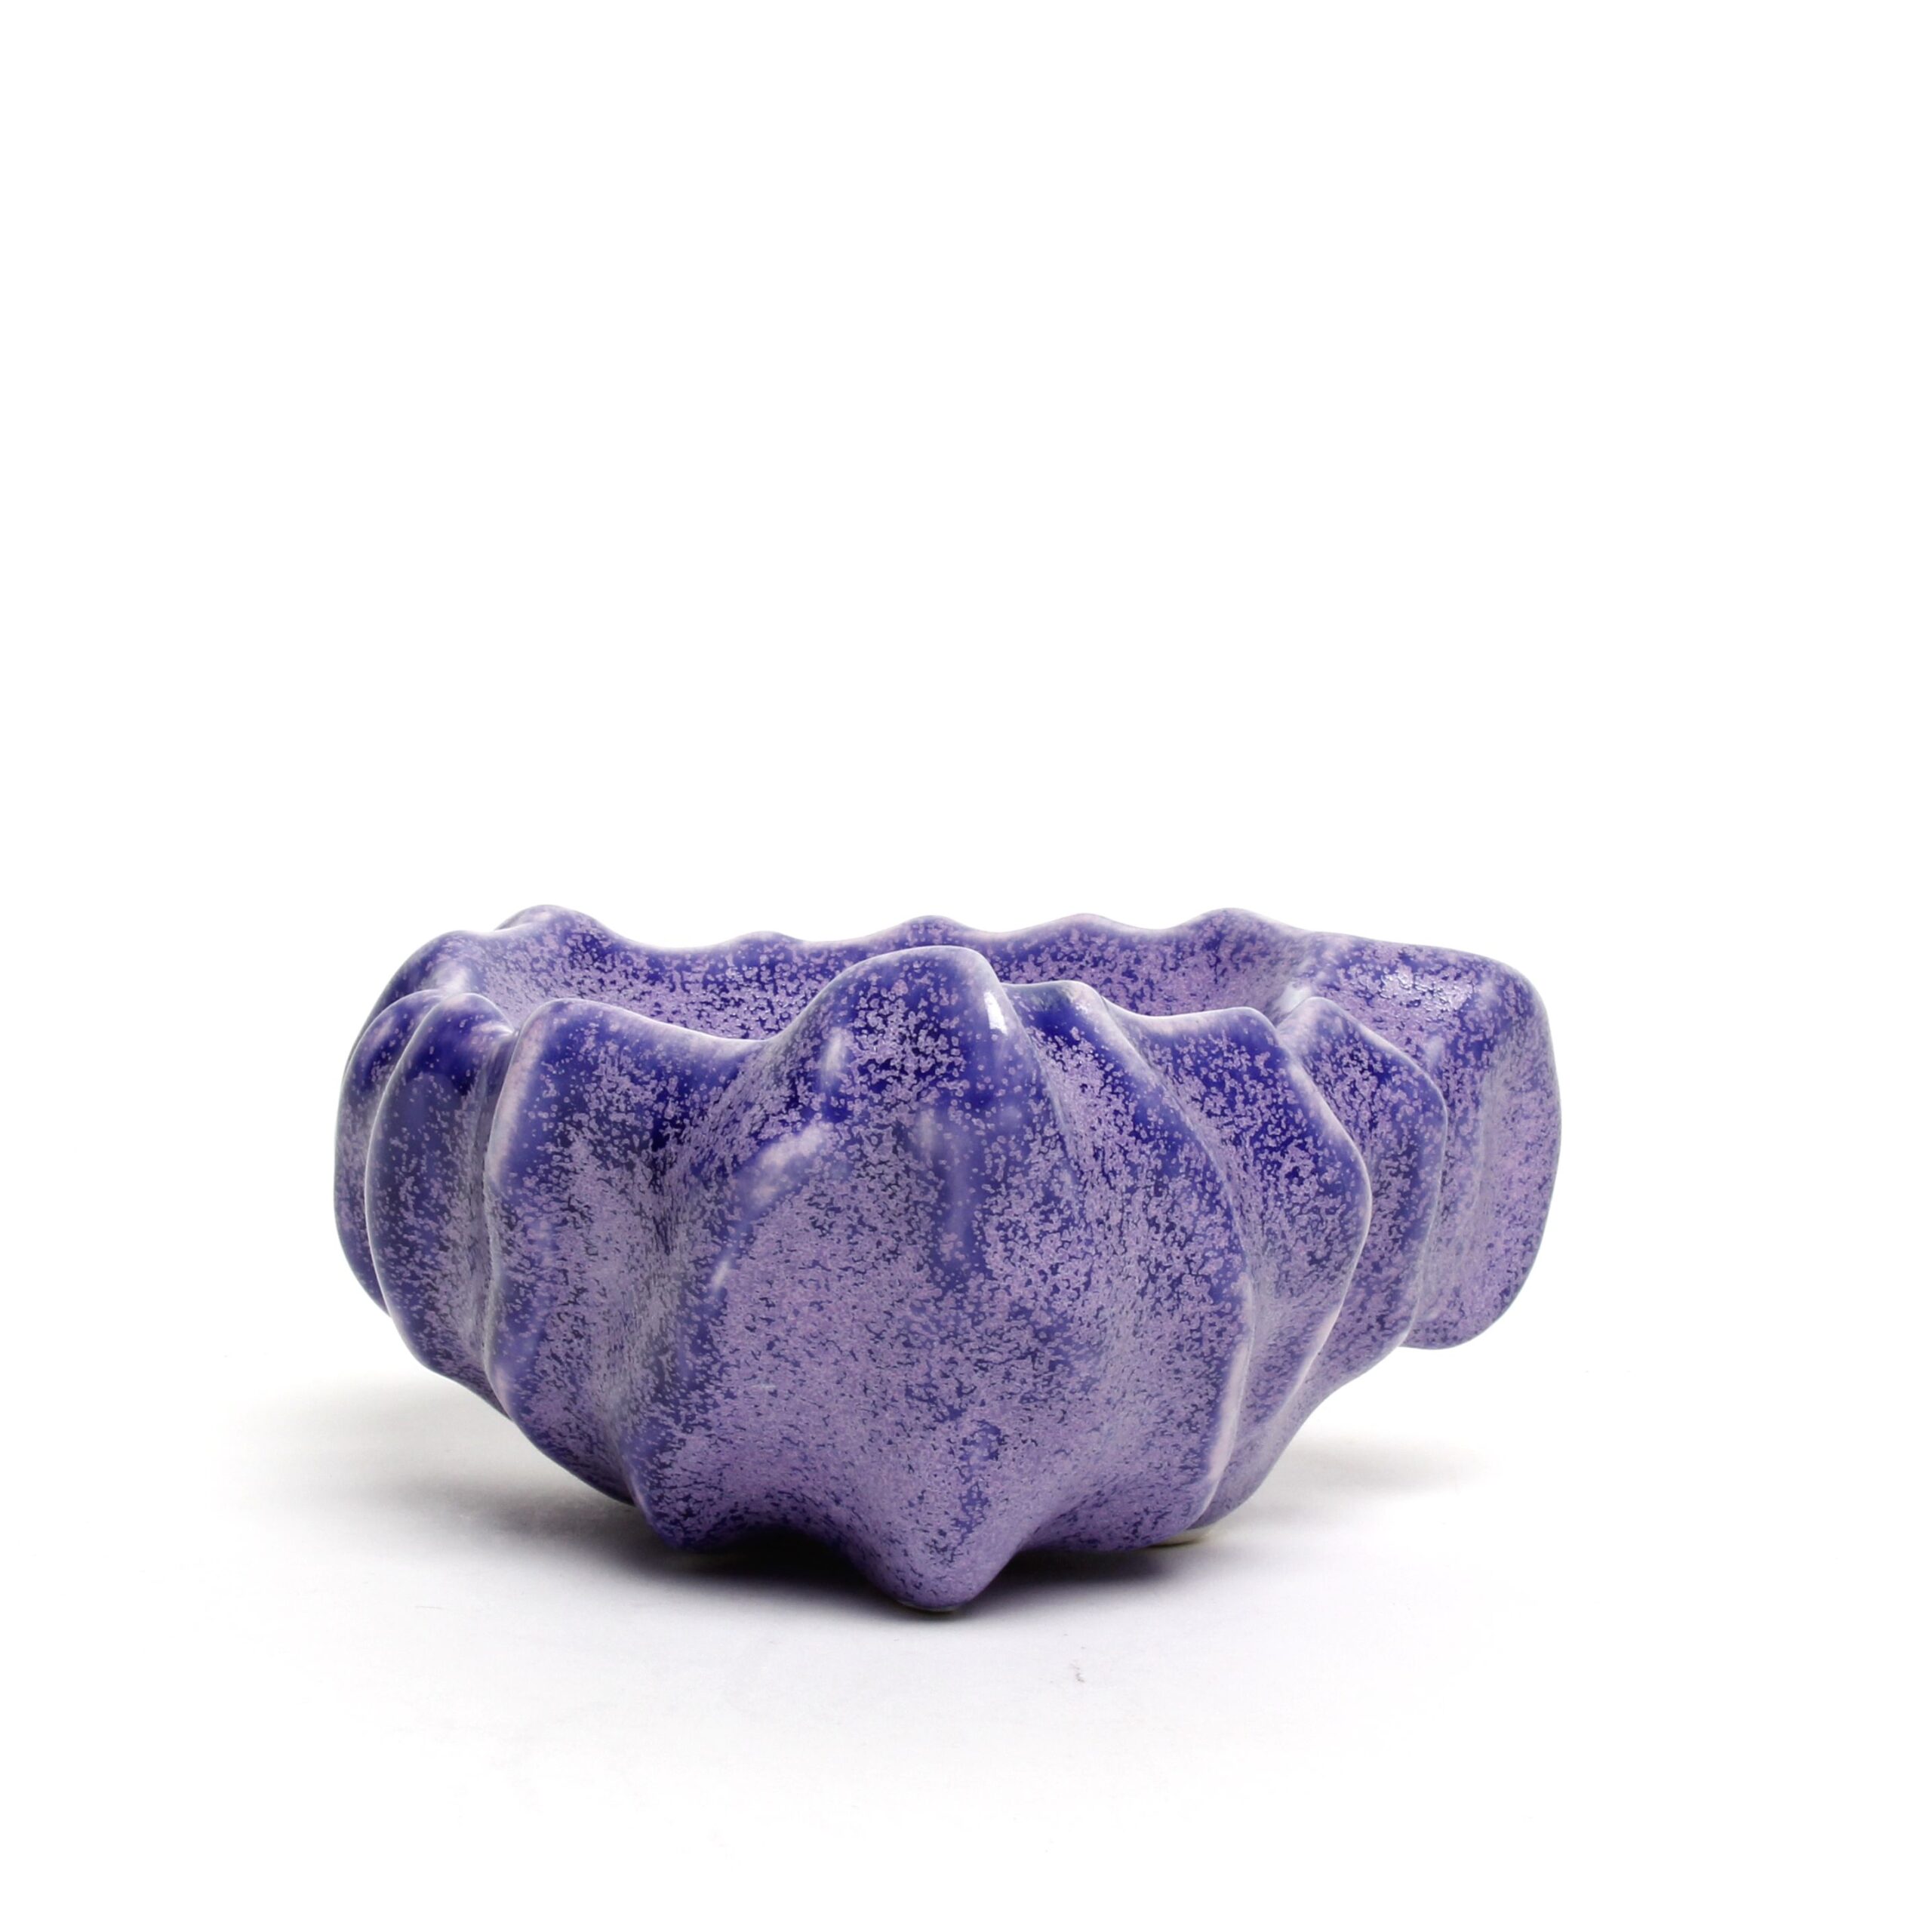 William Lee: Triangle Bowl in Purple Product Image 3 of 3